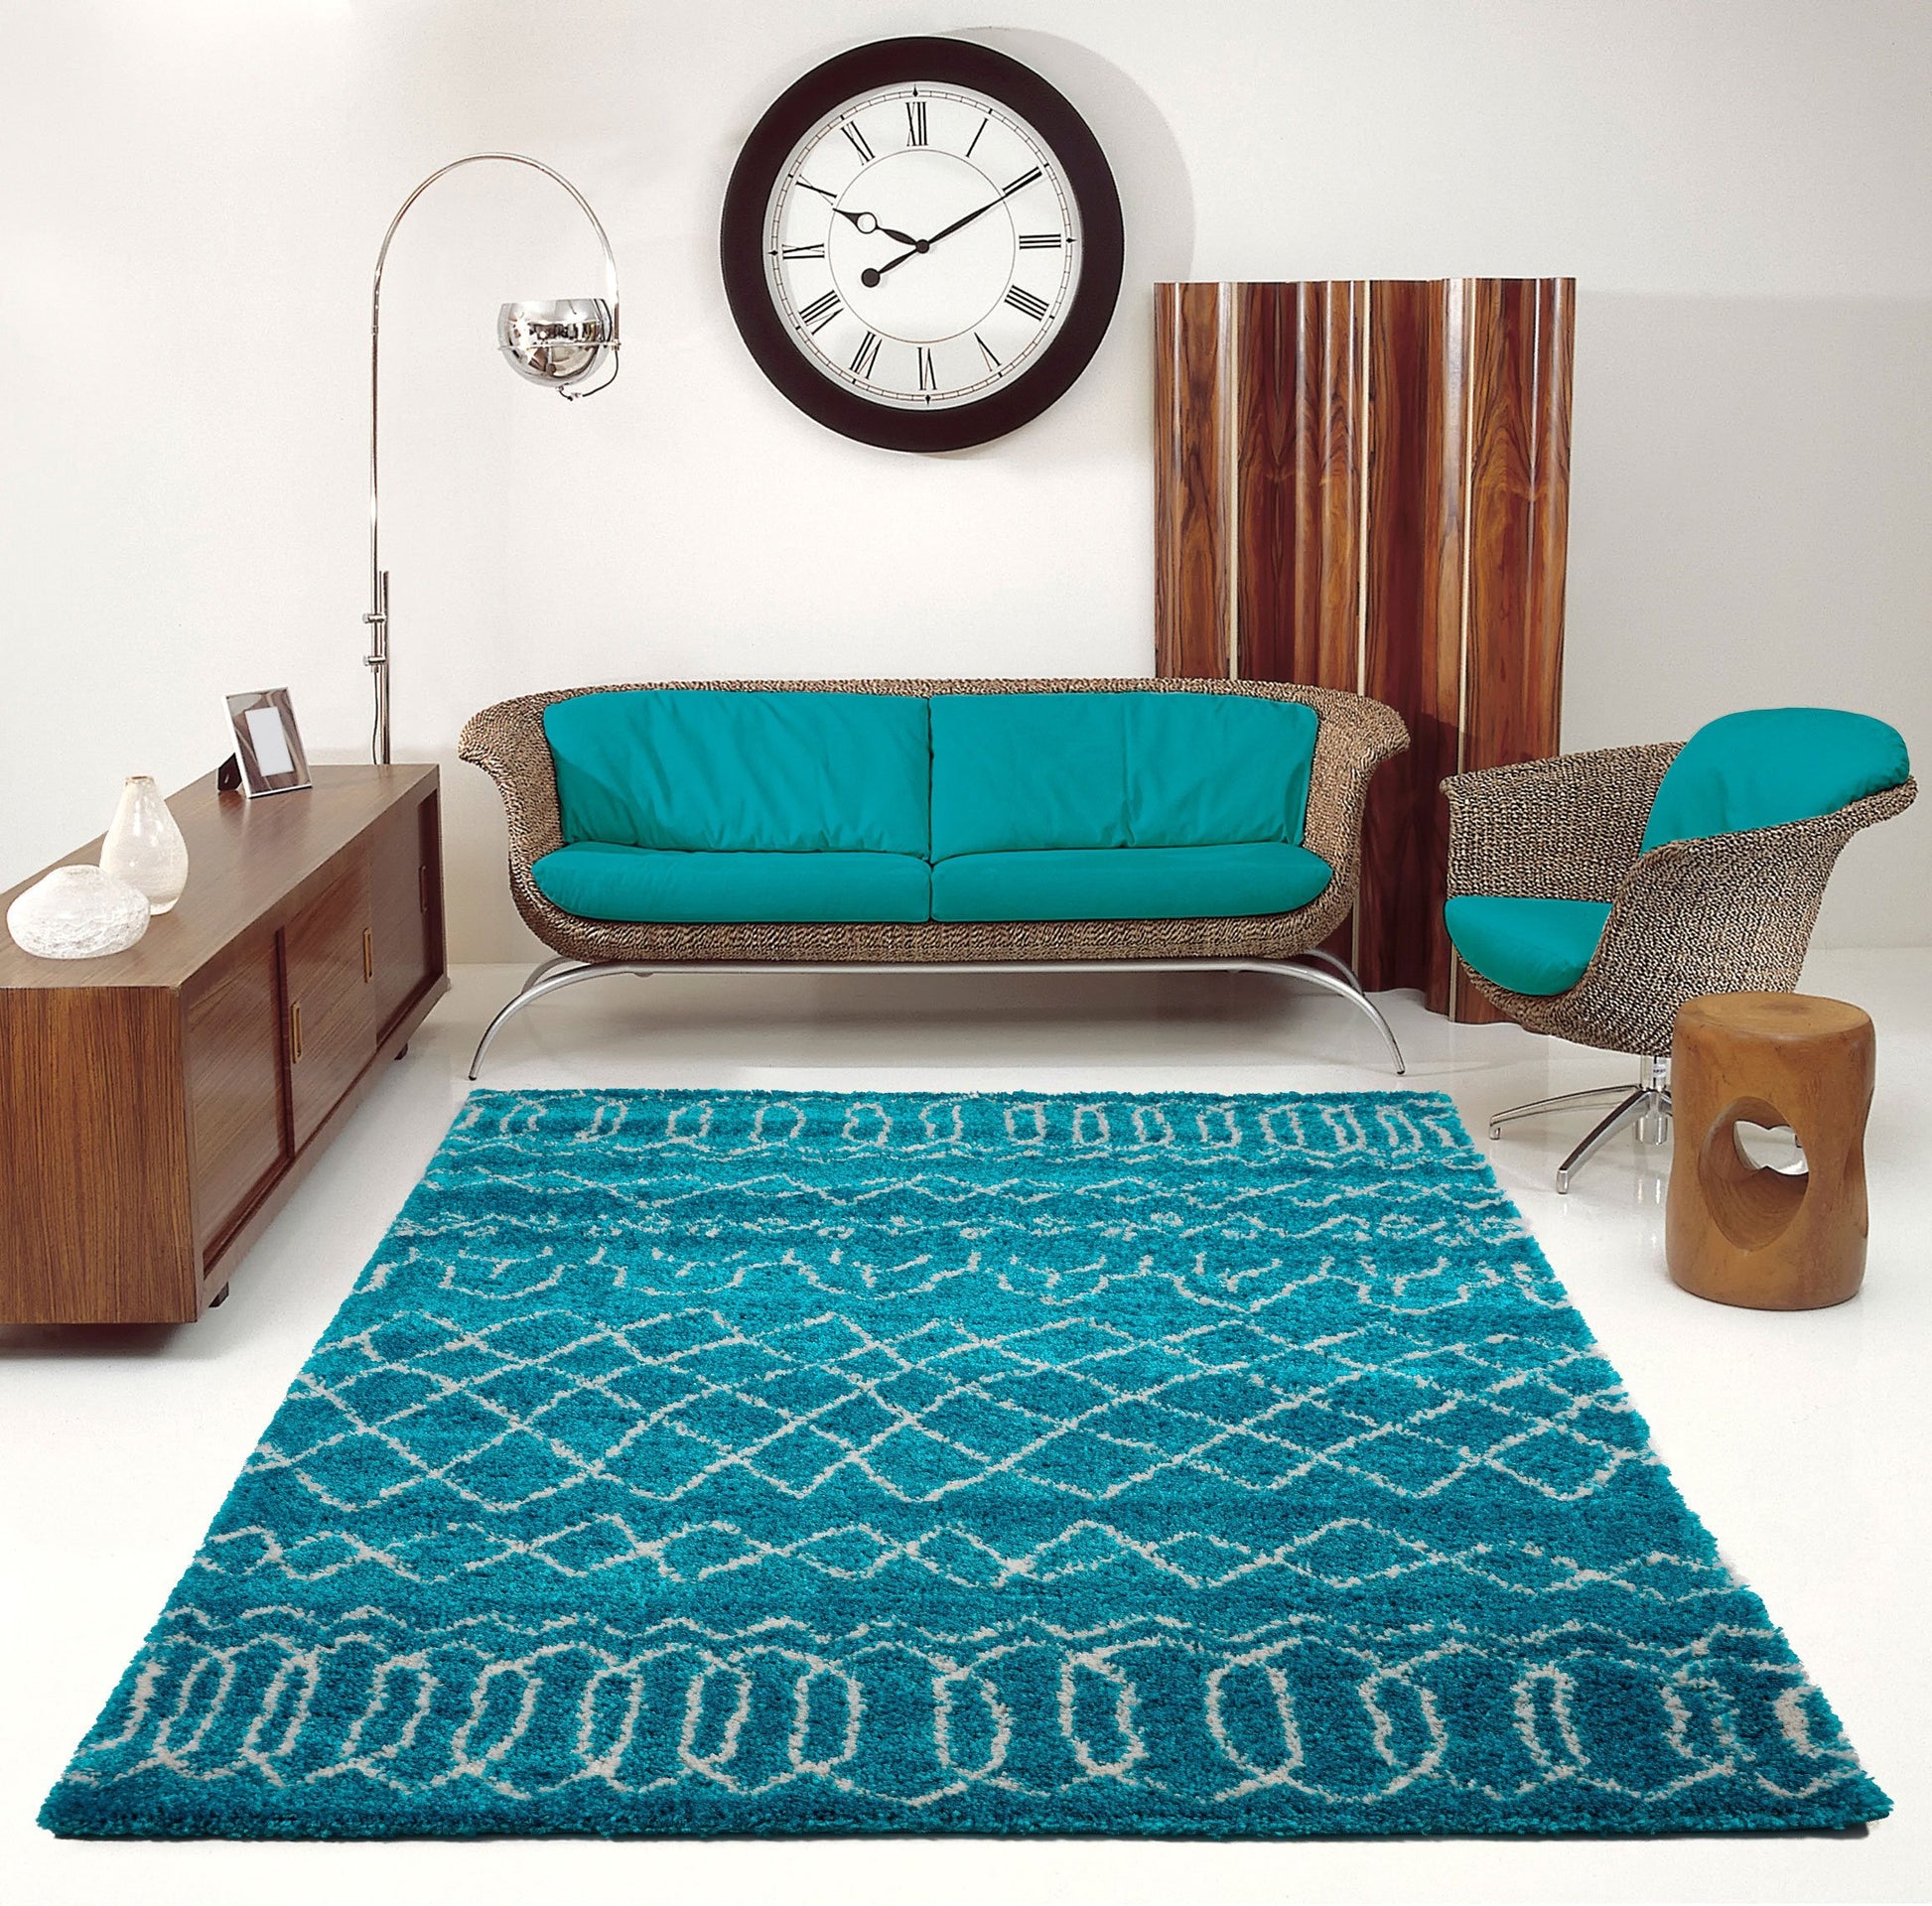 Shaggy Turquoise Ivory Vancouver Area Rug - 